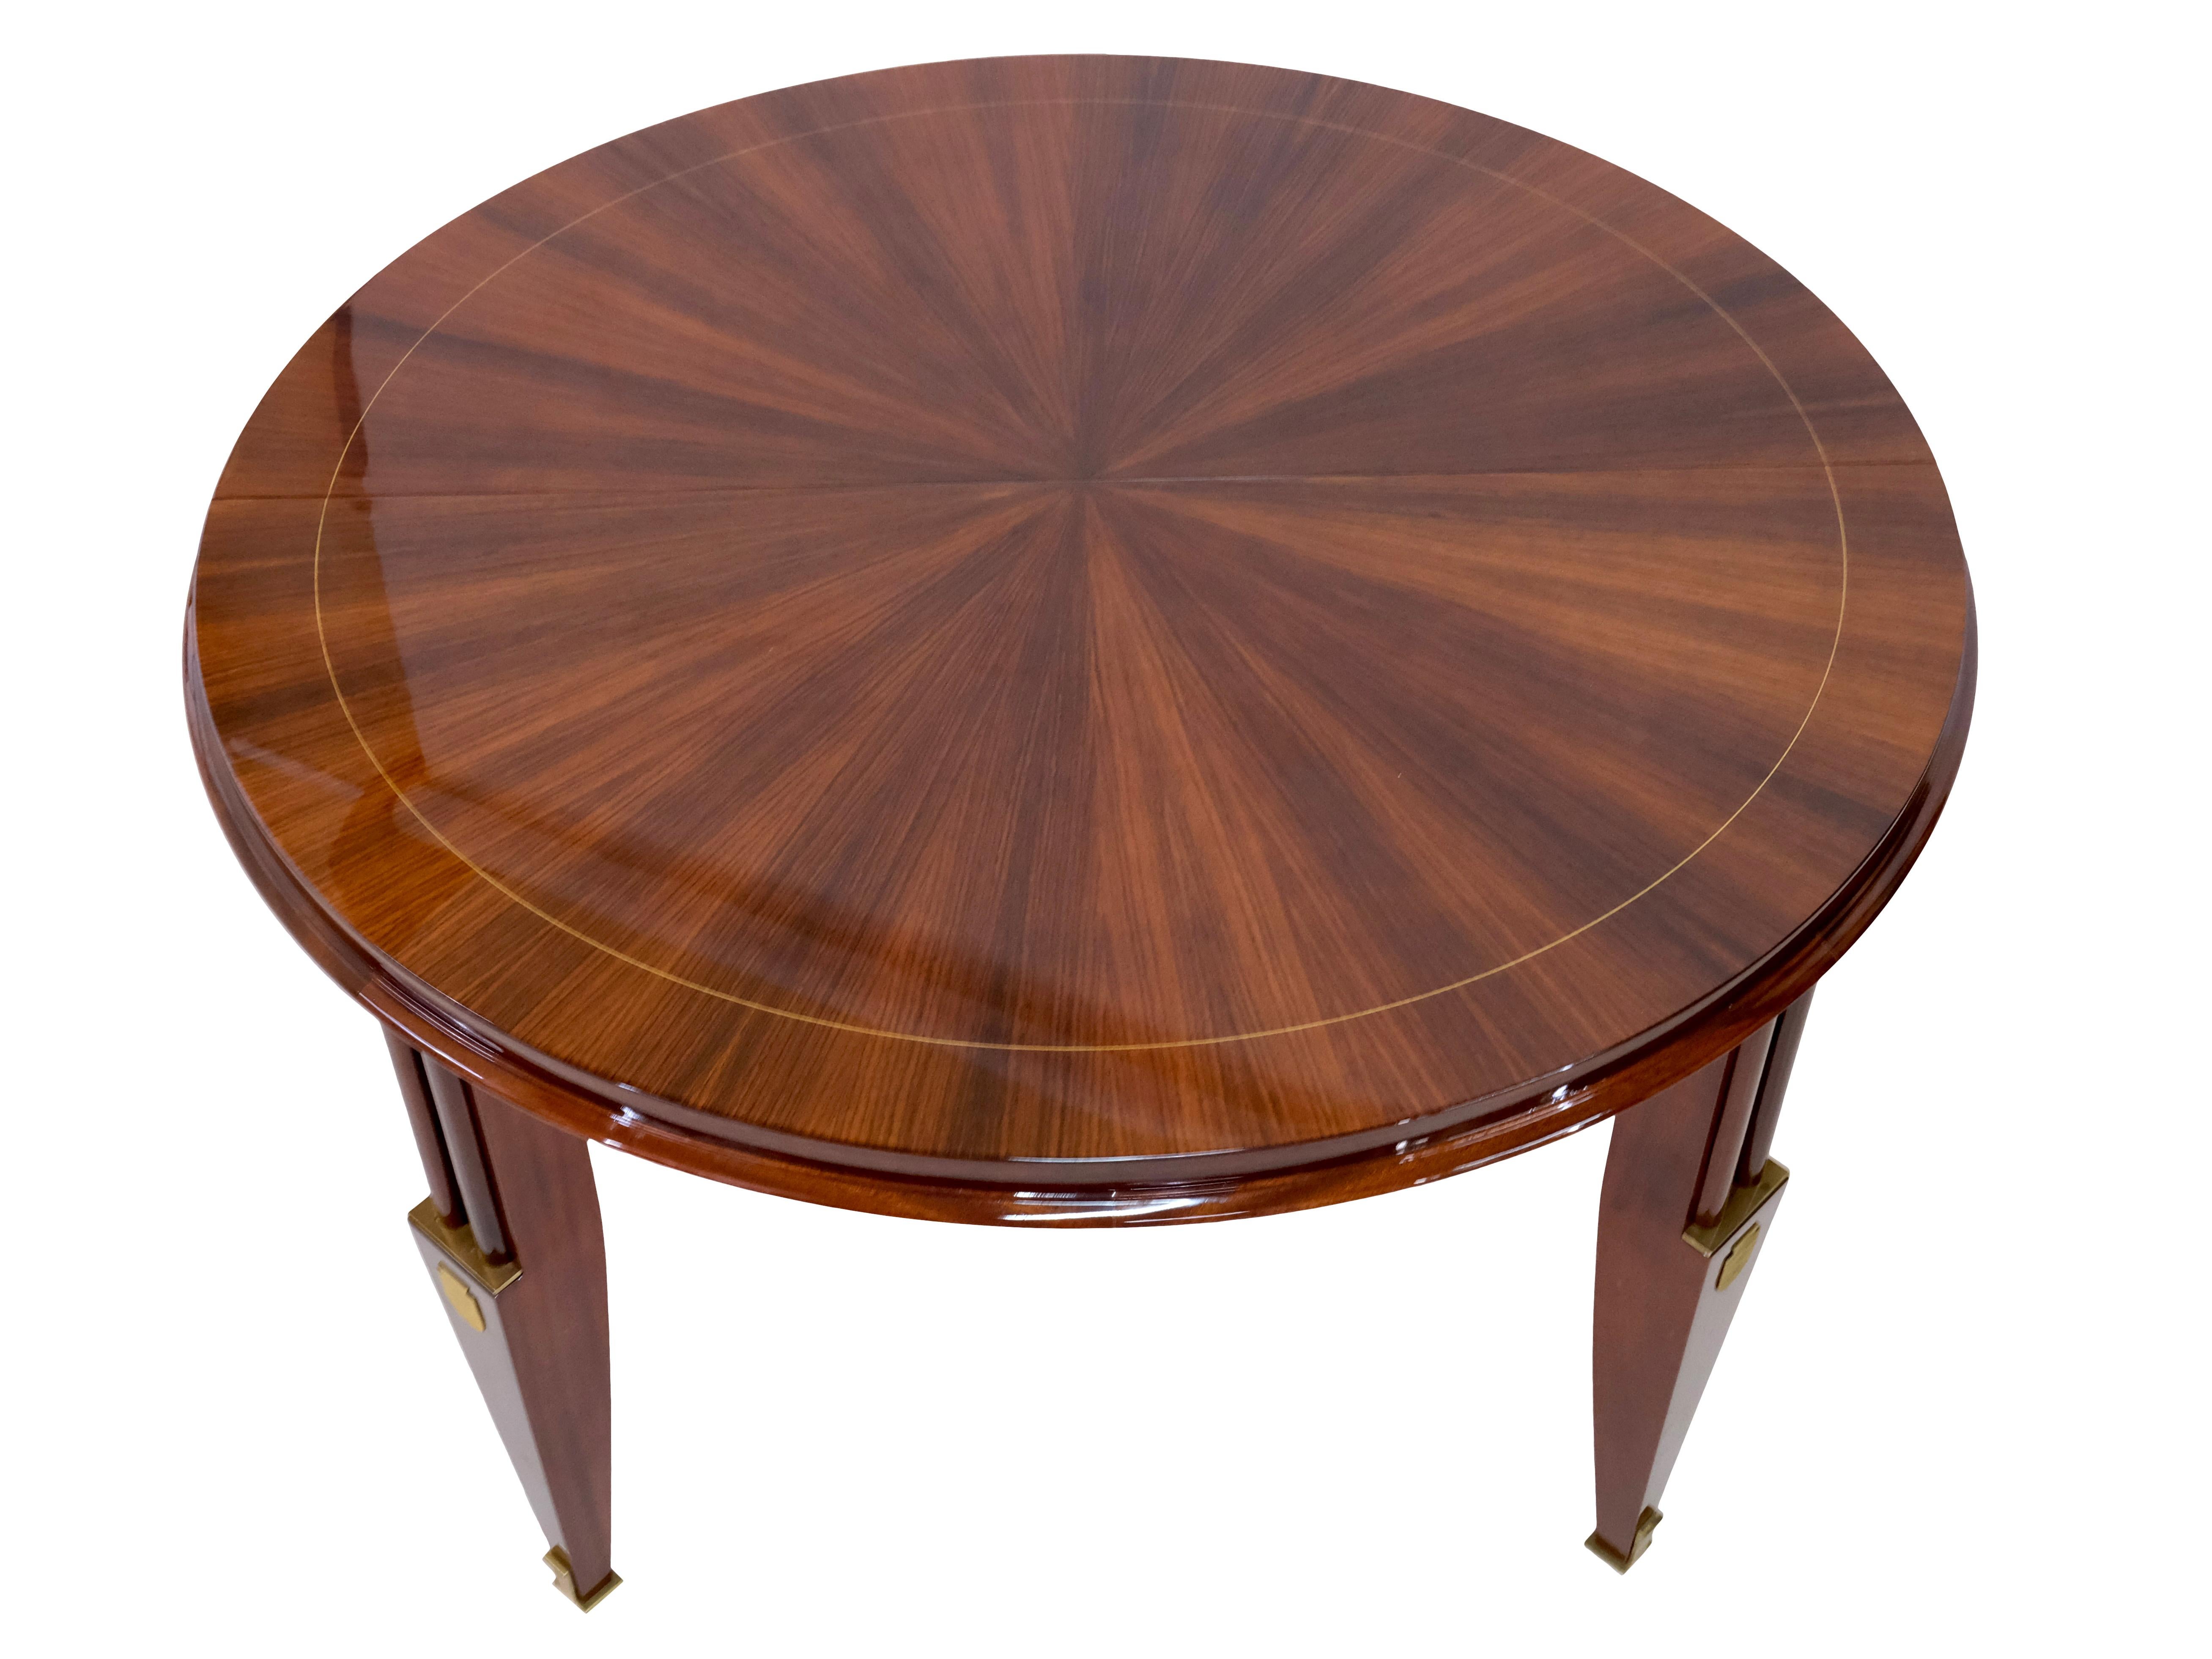 French 1930s Round Art Deco Dining or Center Table in Mahogany with Brass Fittings